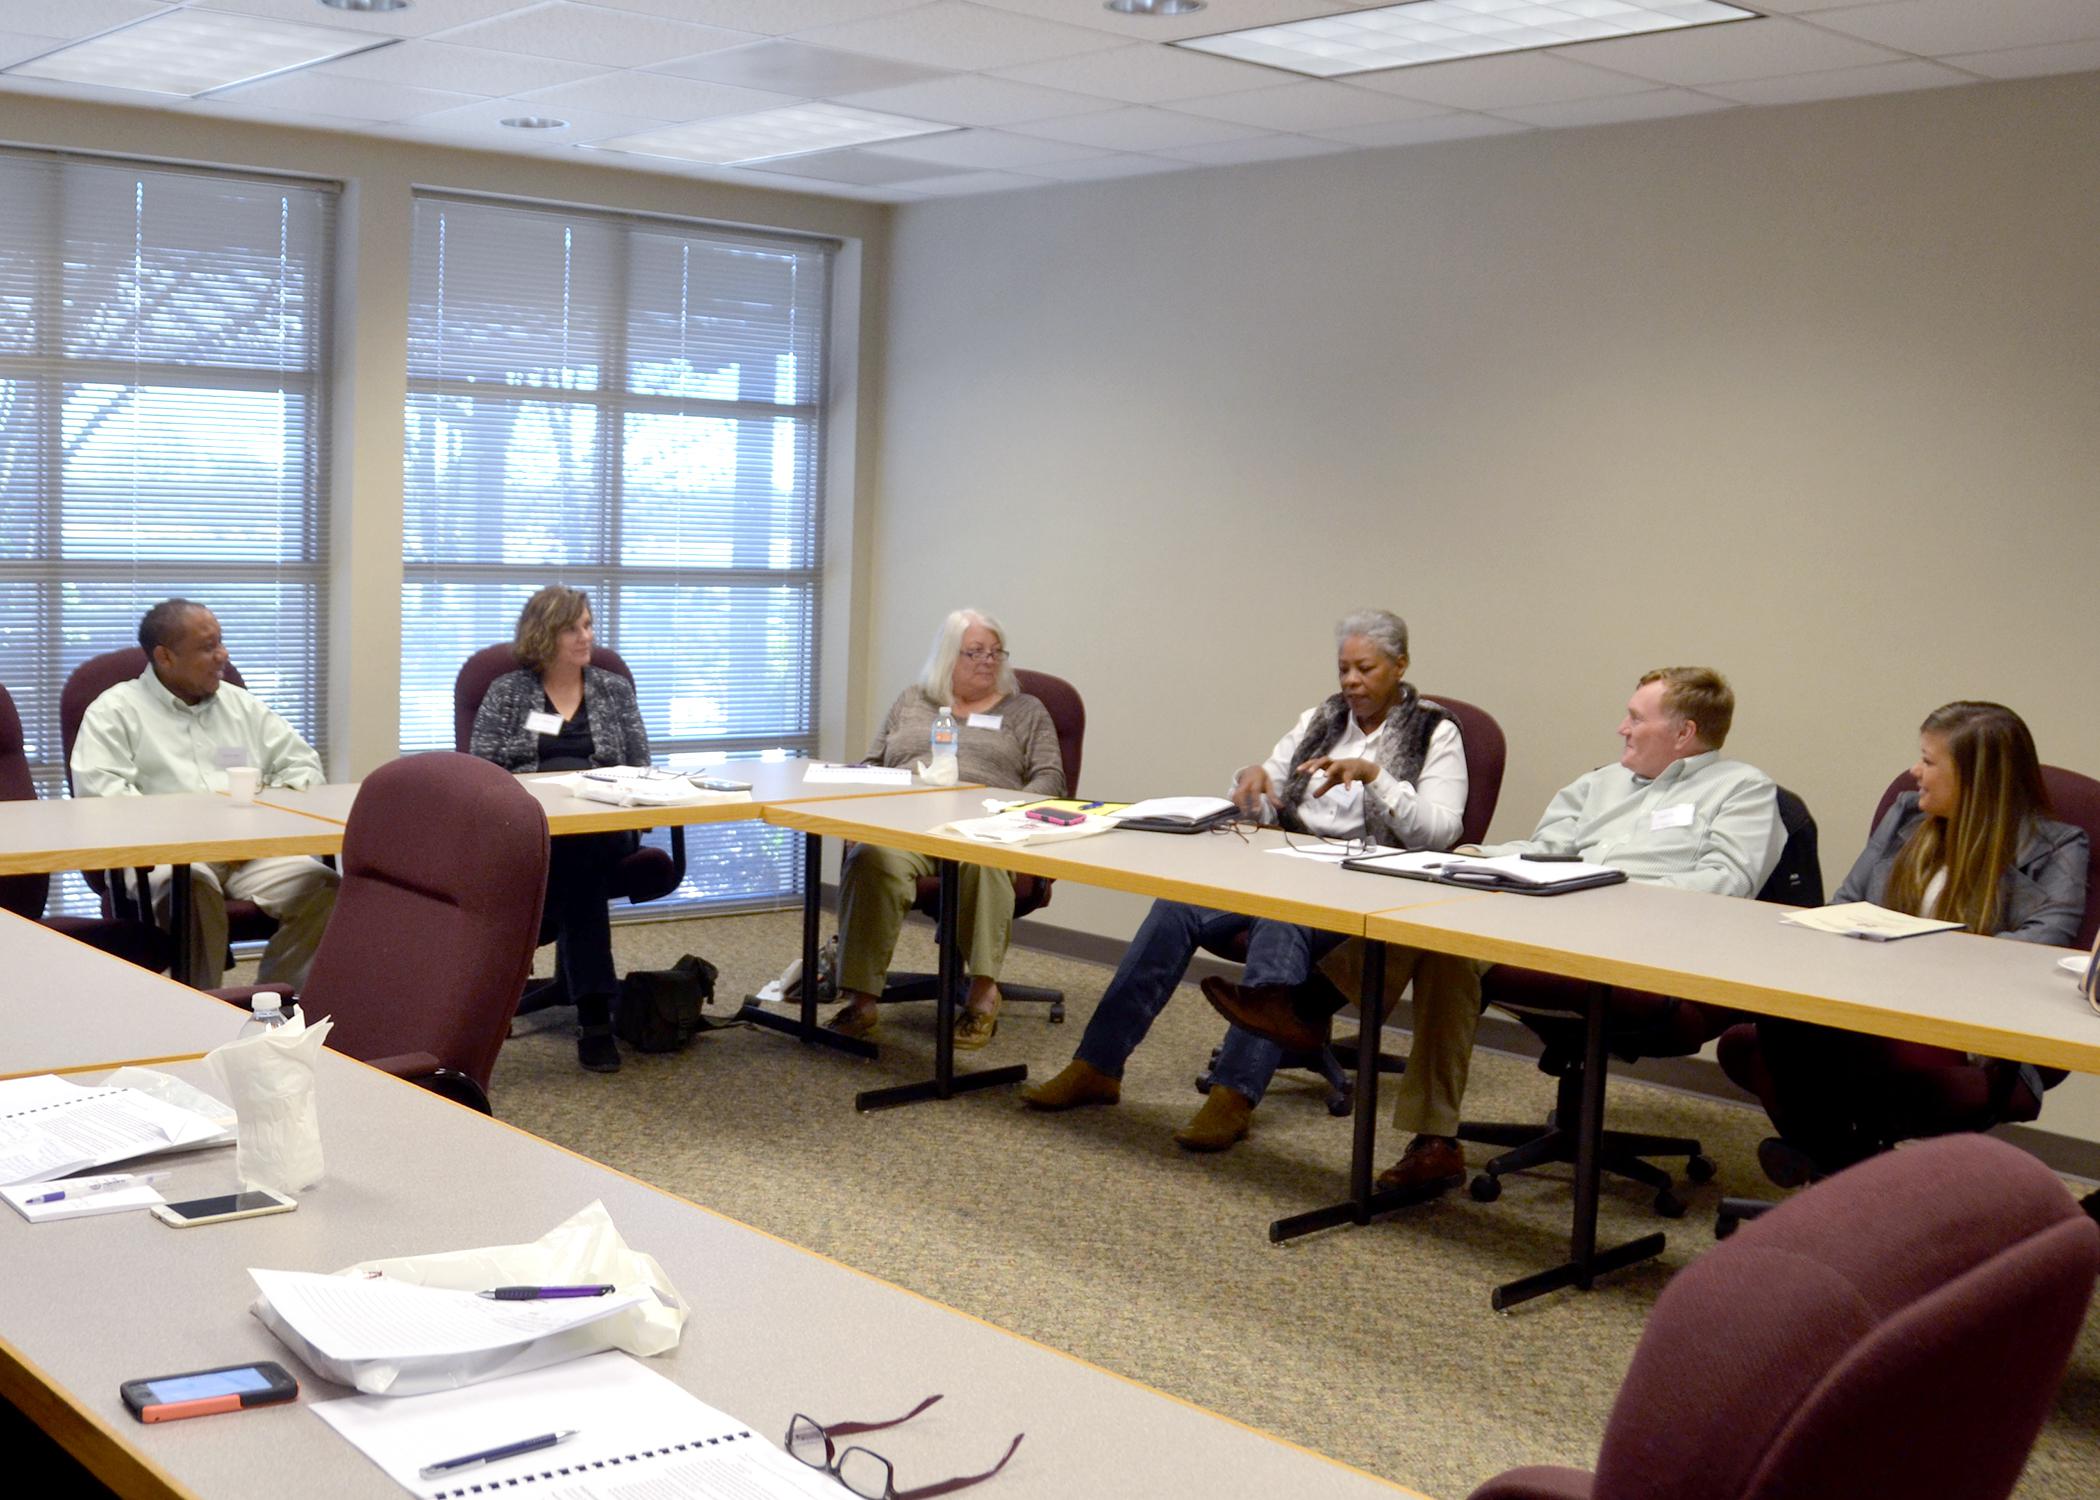 A group of small ruminant and swine producers gathered to discuss research and educational priorities during the Central Mississippi Producer Advisory Council meeting Feb. 16, 2016, in Raymond, Mississippi. The meeting brings area agricultural producers and industry leaders together with MSU personnel for the exchange of ideas and concerns. (Photo by MSU Extension Service/Susan Collins-Smith)